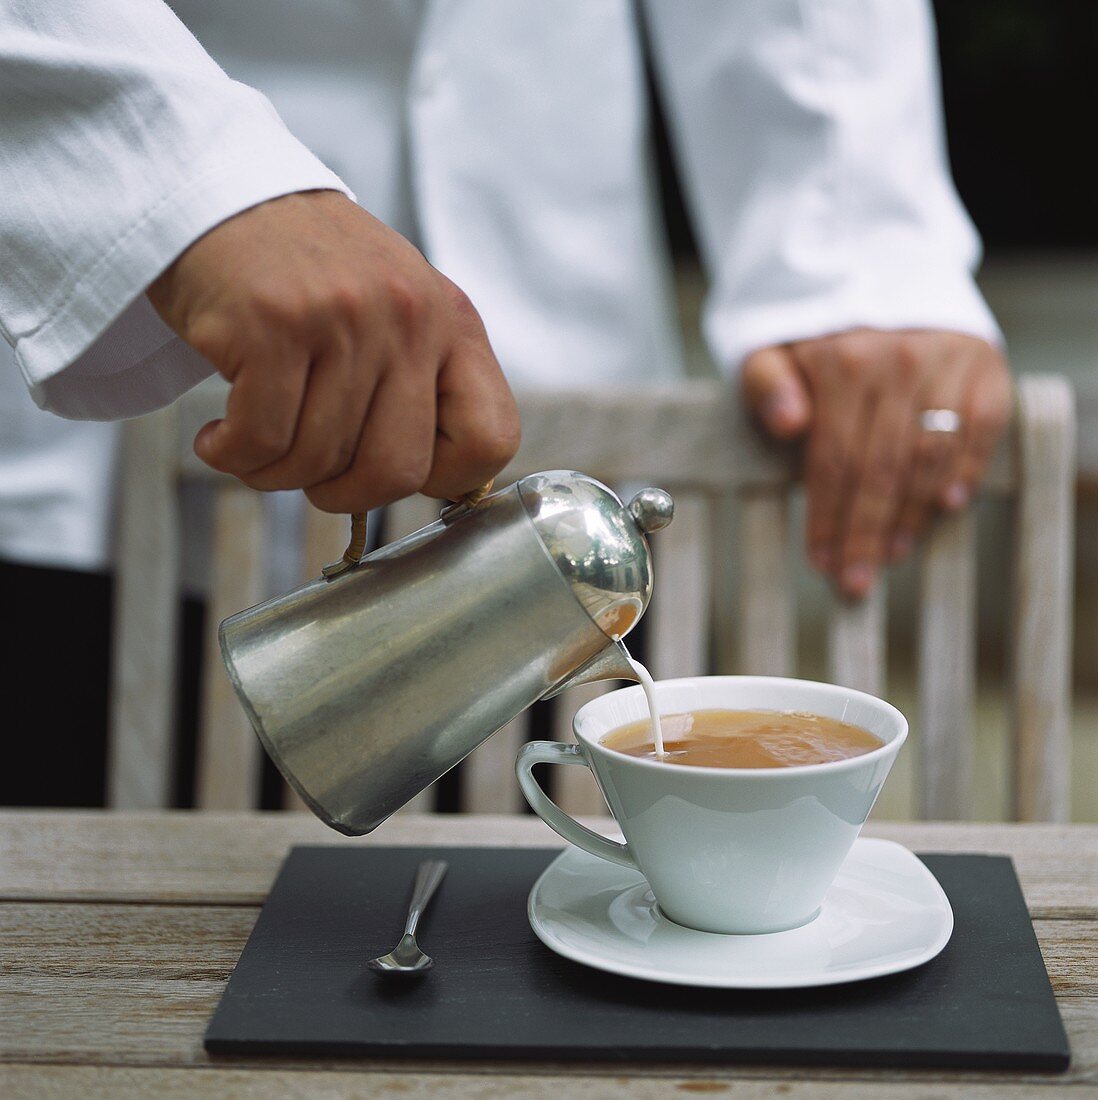 Waiter pouring milk into tea cup